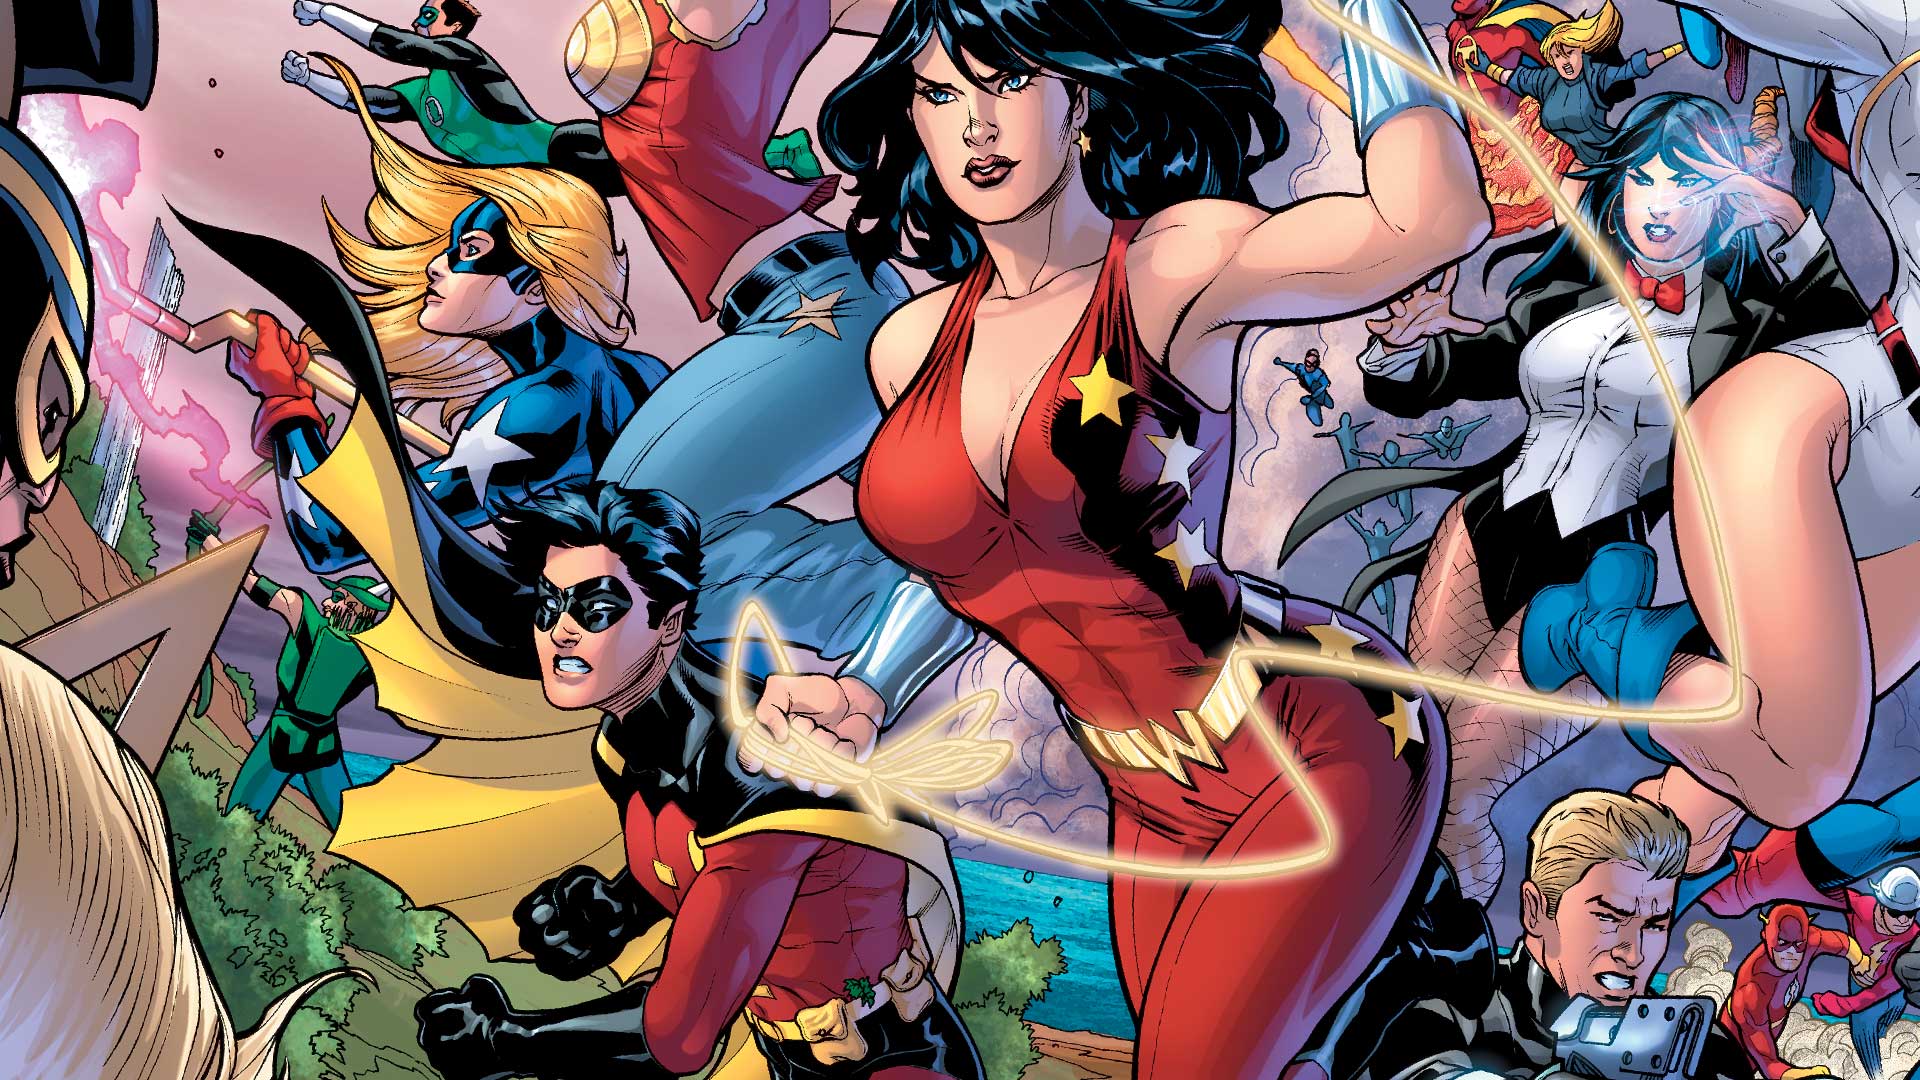 Donna Troy in red suit wielding the Lasso of Truth